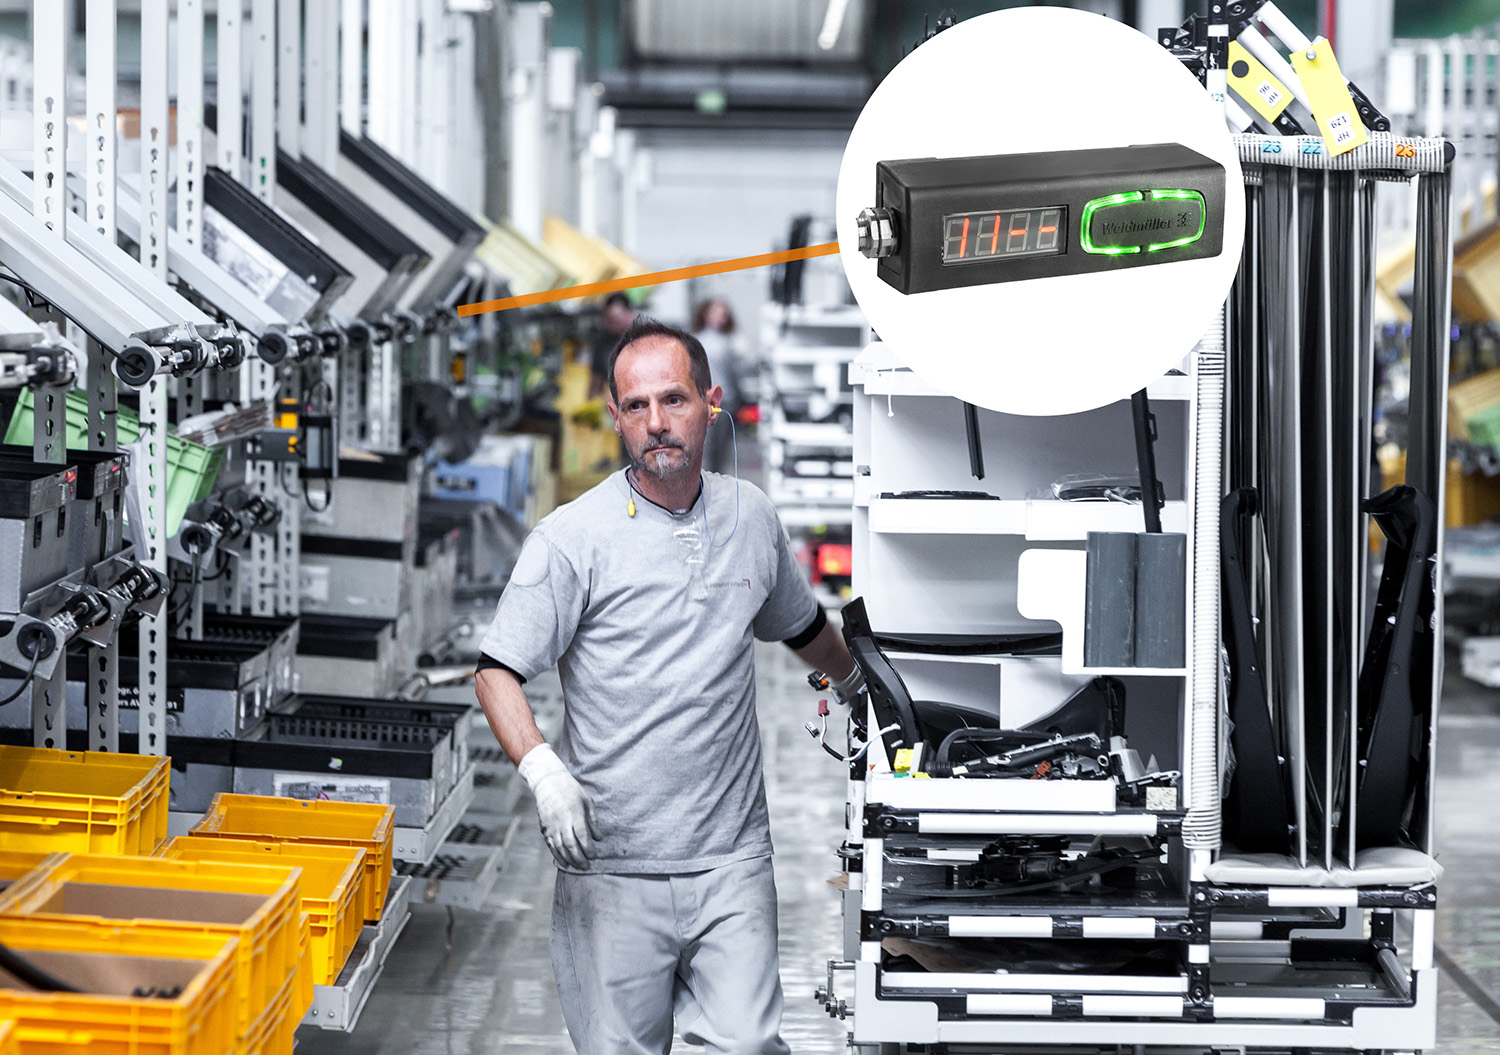 Pick-to-Light solution for industry and intralogistics